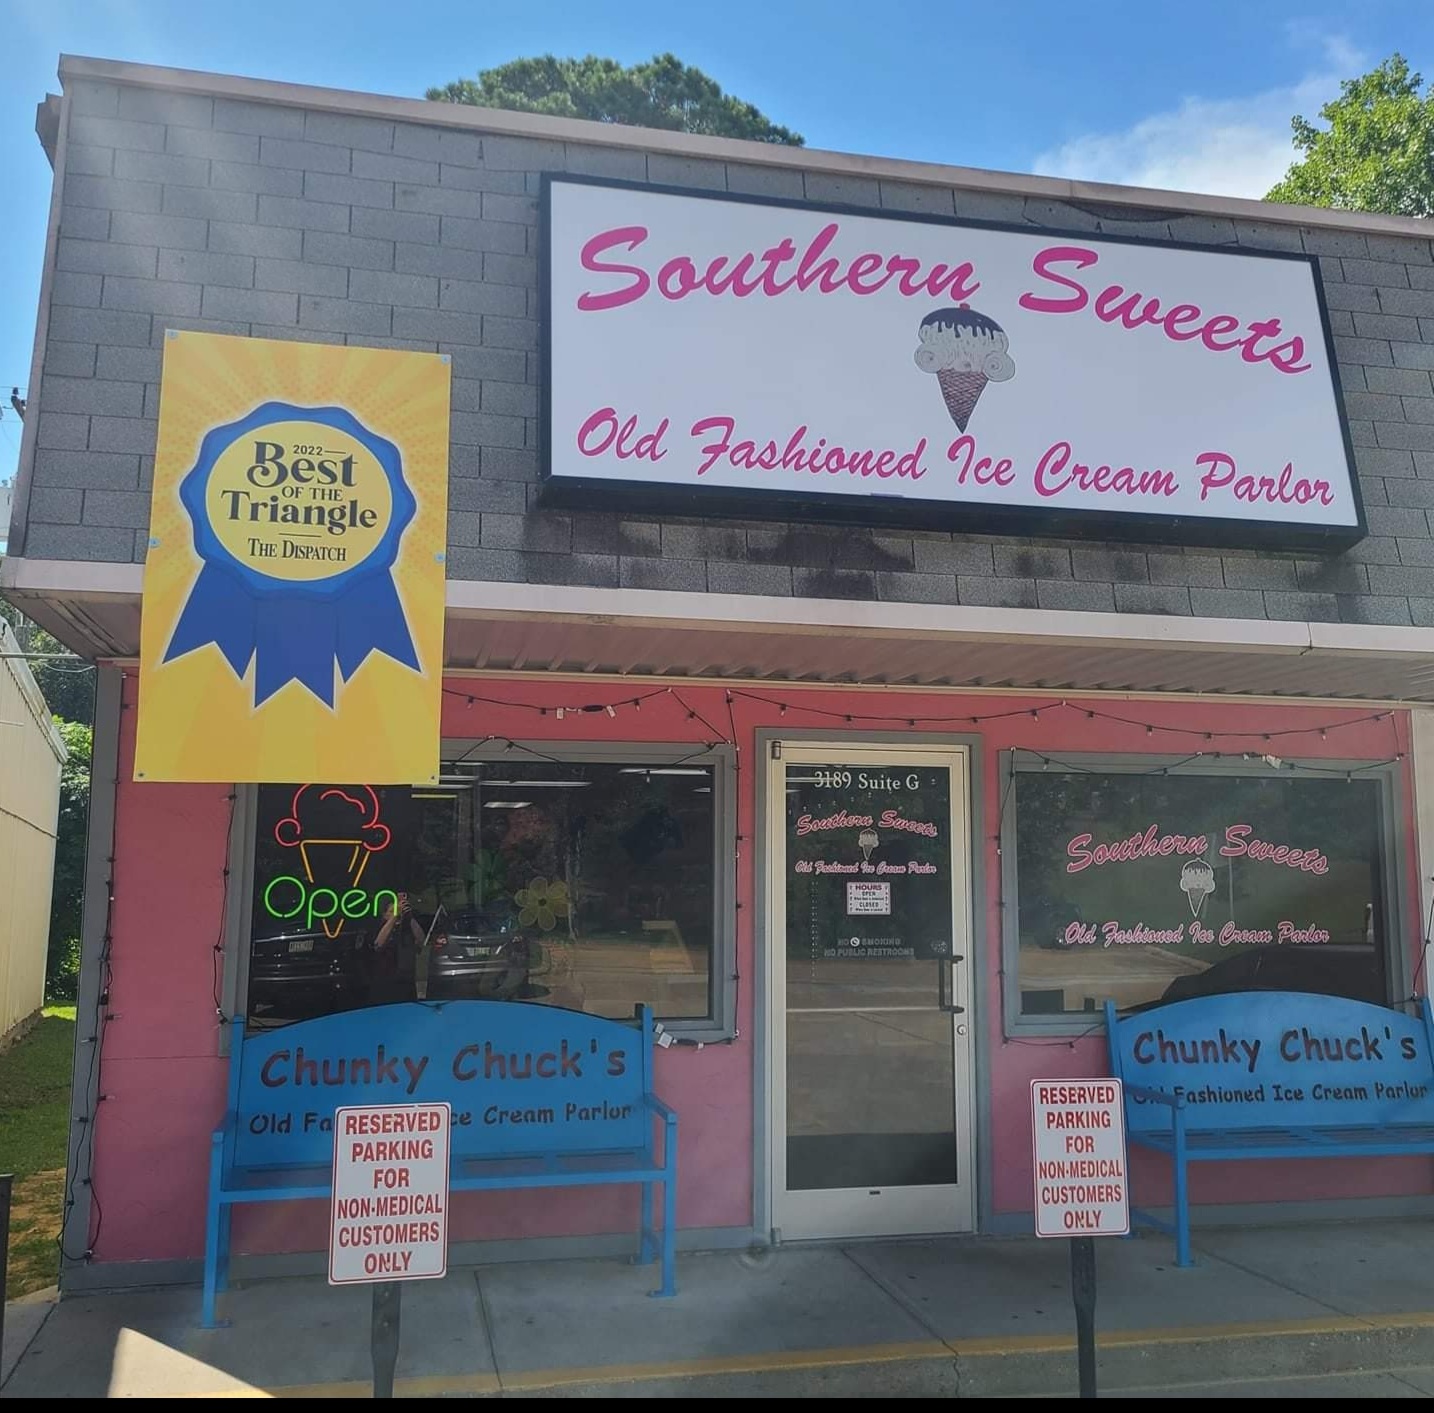 Southern Sweets Old Fashioned Ice Cream Parlor